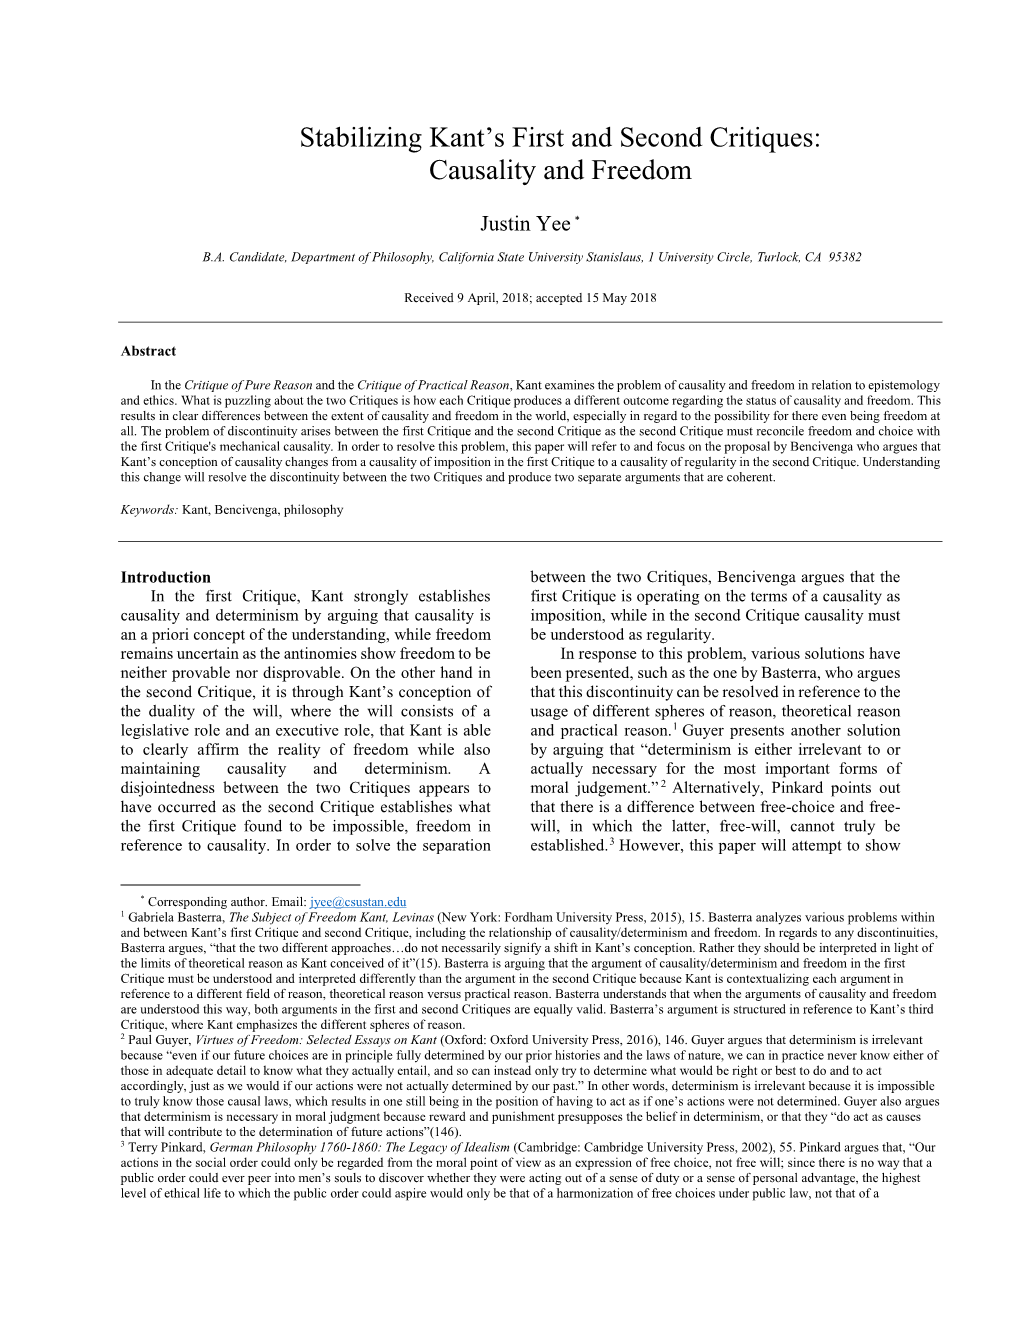 Stabilizing Kant's First and Second Critiques: Causality and Freedom